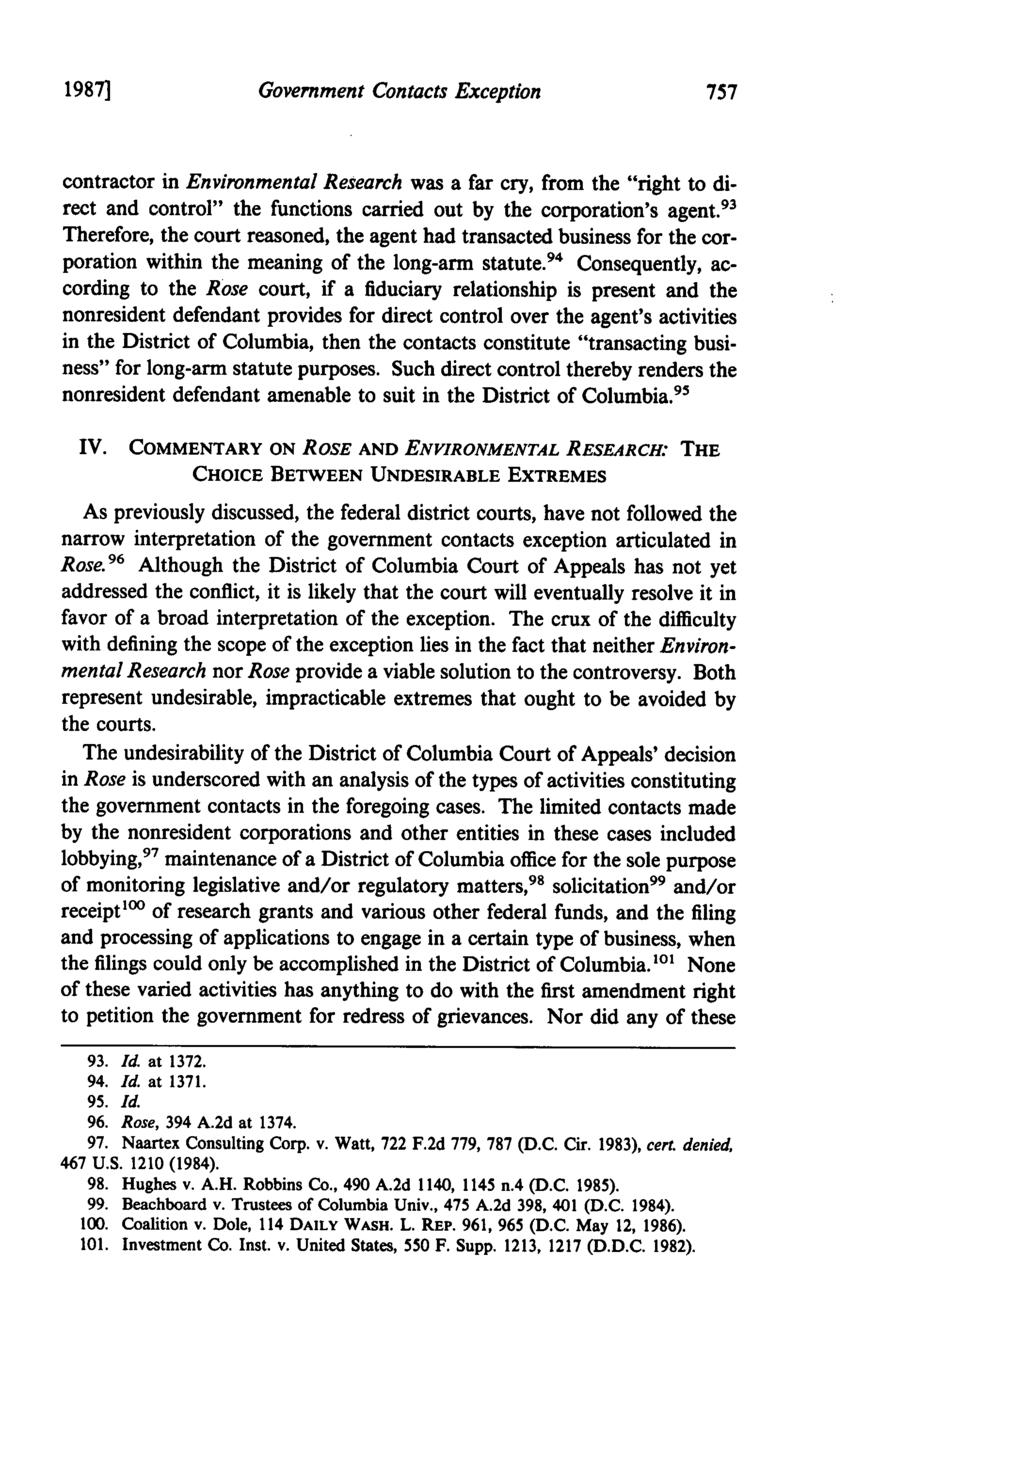 1987] Government Contacts Exception contractor in Environmental Research was a far cry, from the "right to direct and control" the functions carried out by the corporation's agent.